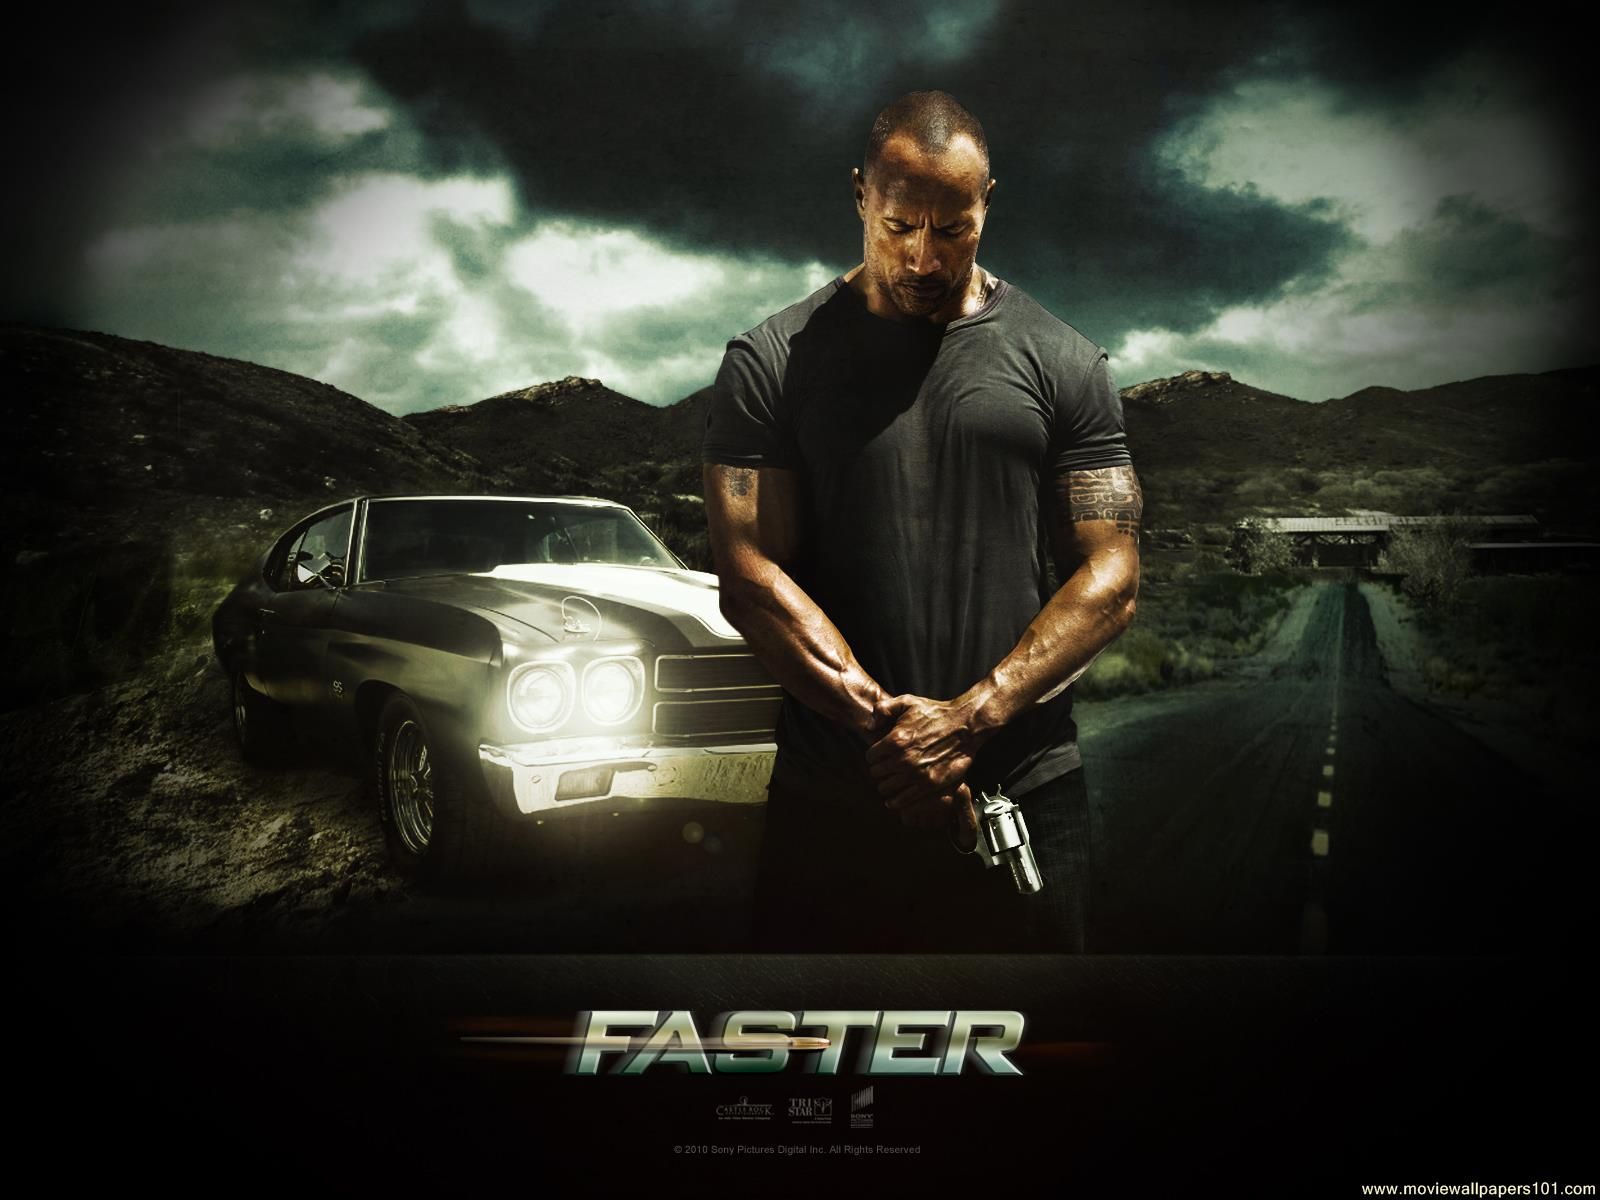 Faster Movie Image Dwayne Johnson Collider Movies Series In